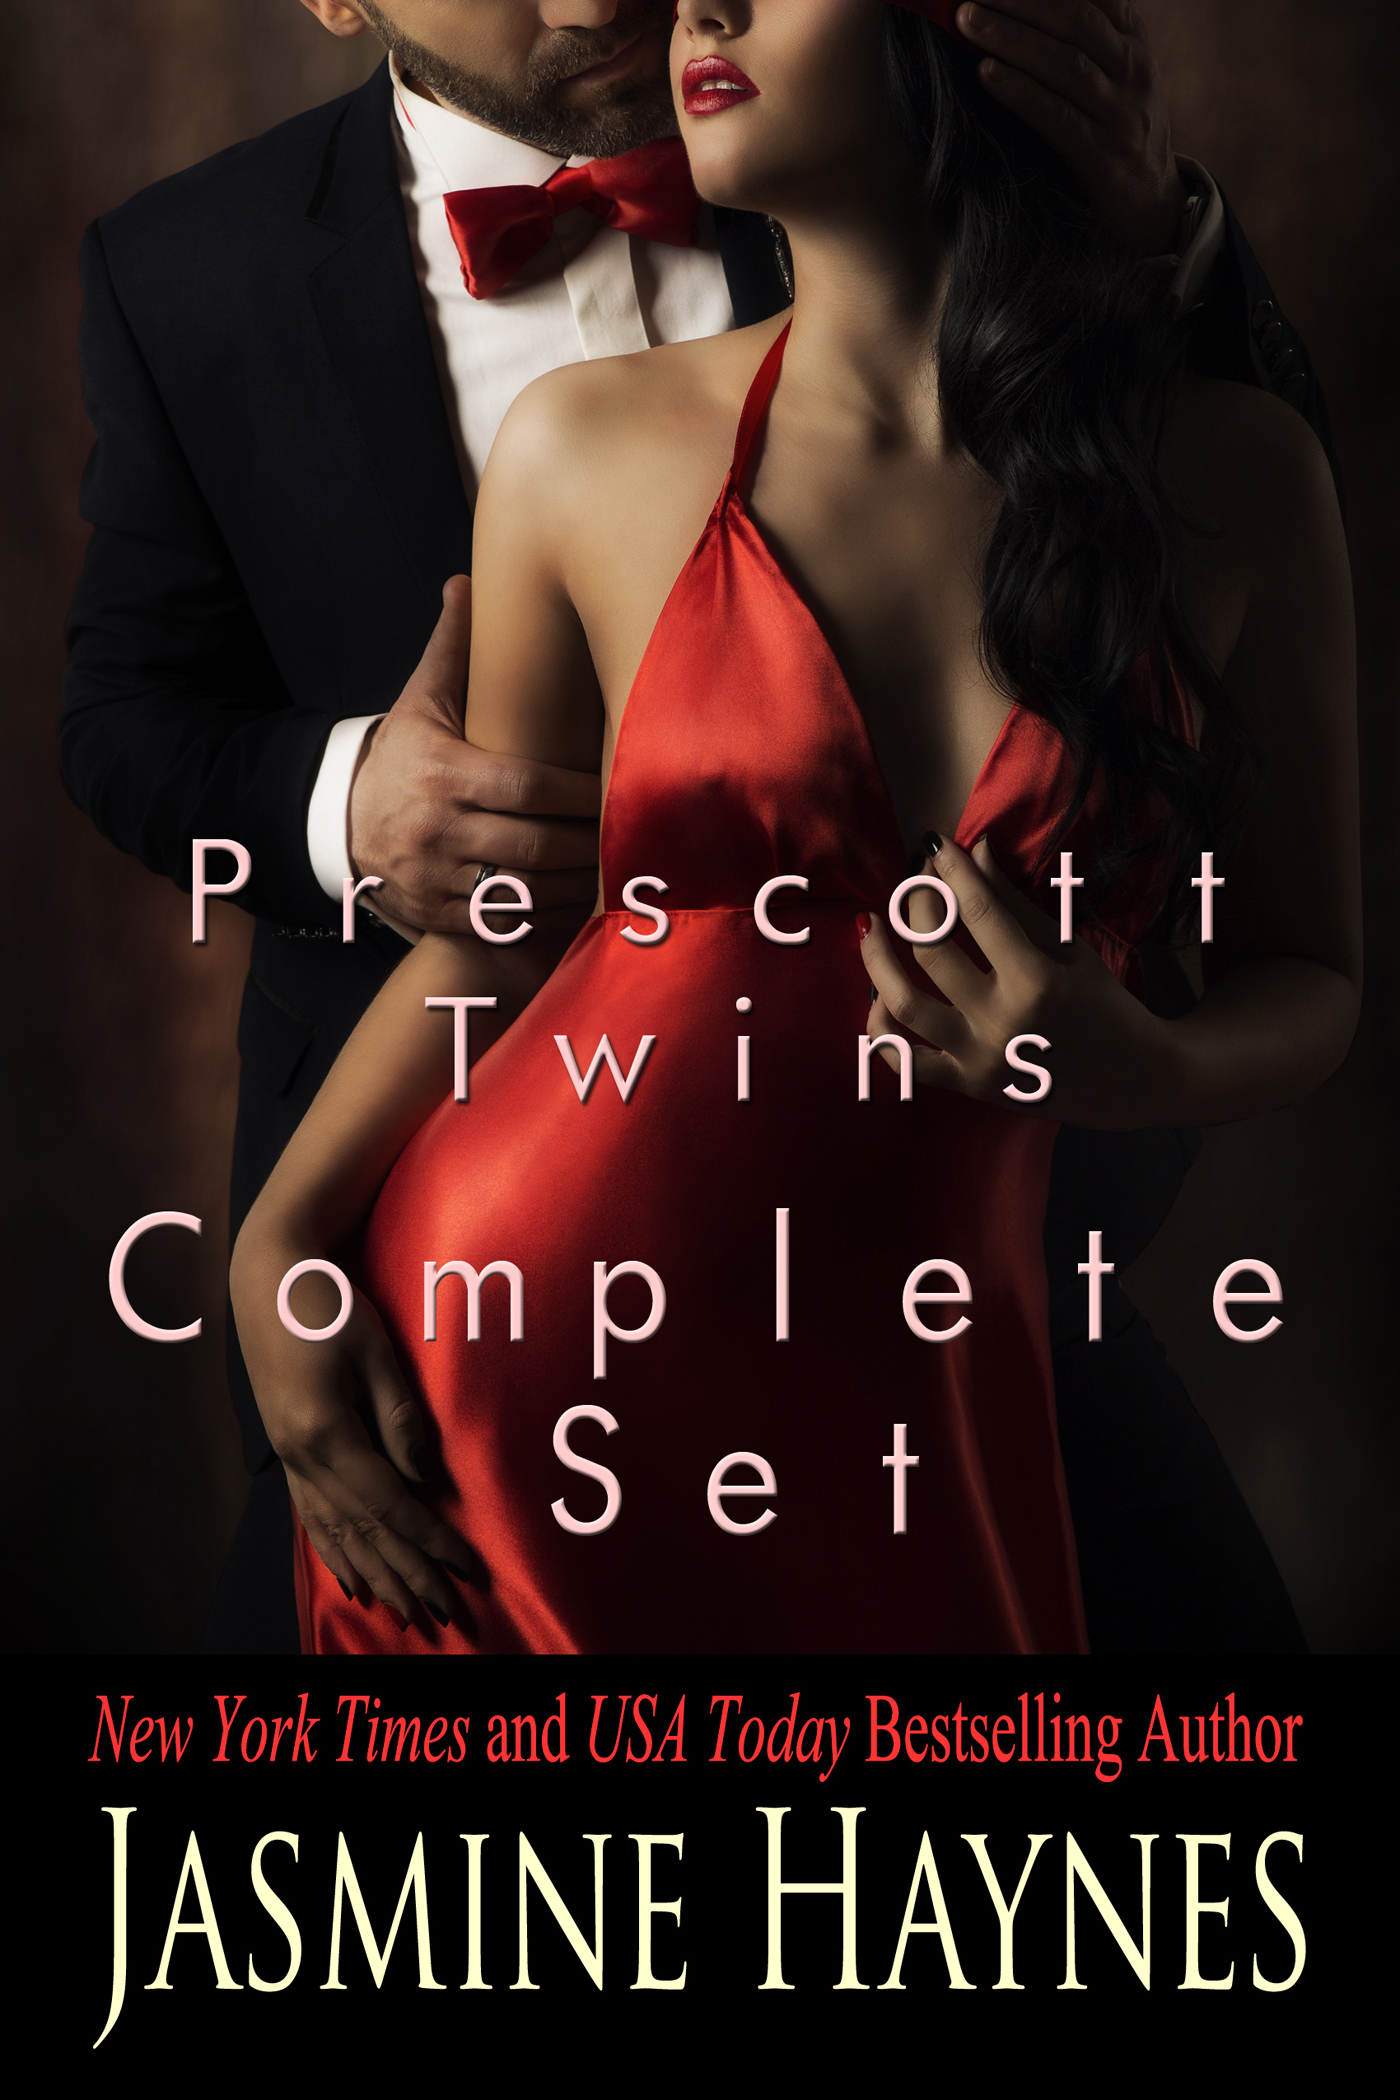 Cover of Prescott Twins Complete Set by New York Times and USA Today Bestselling Author Jasmine Haynes